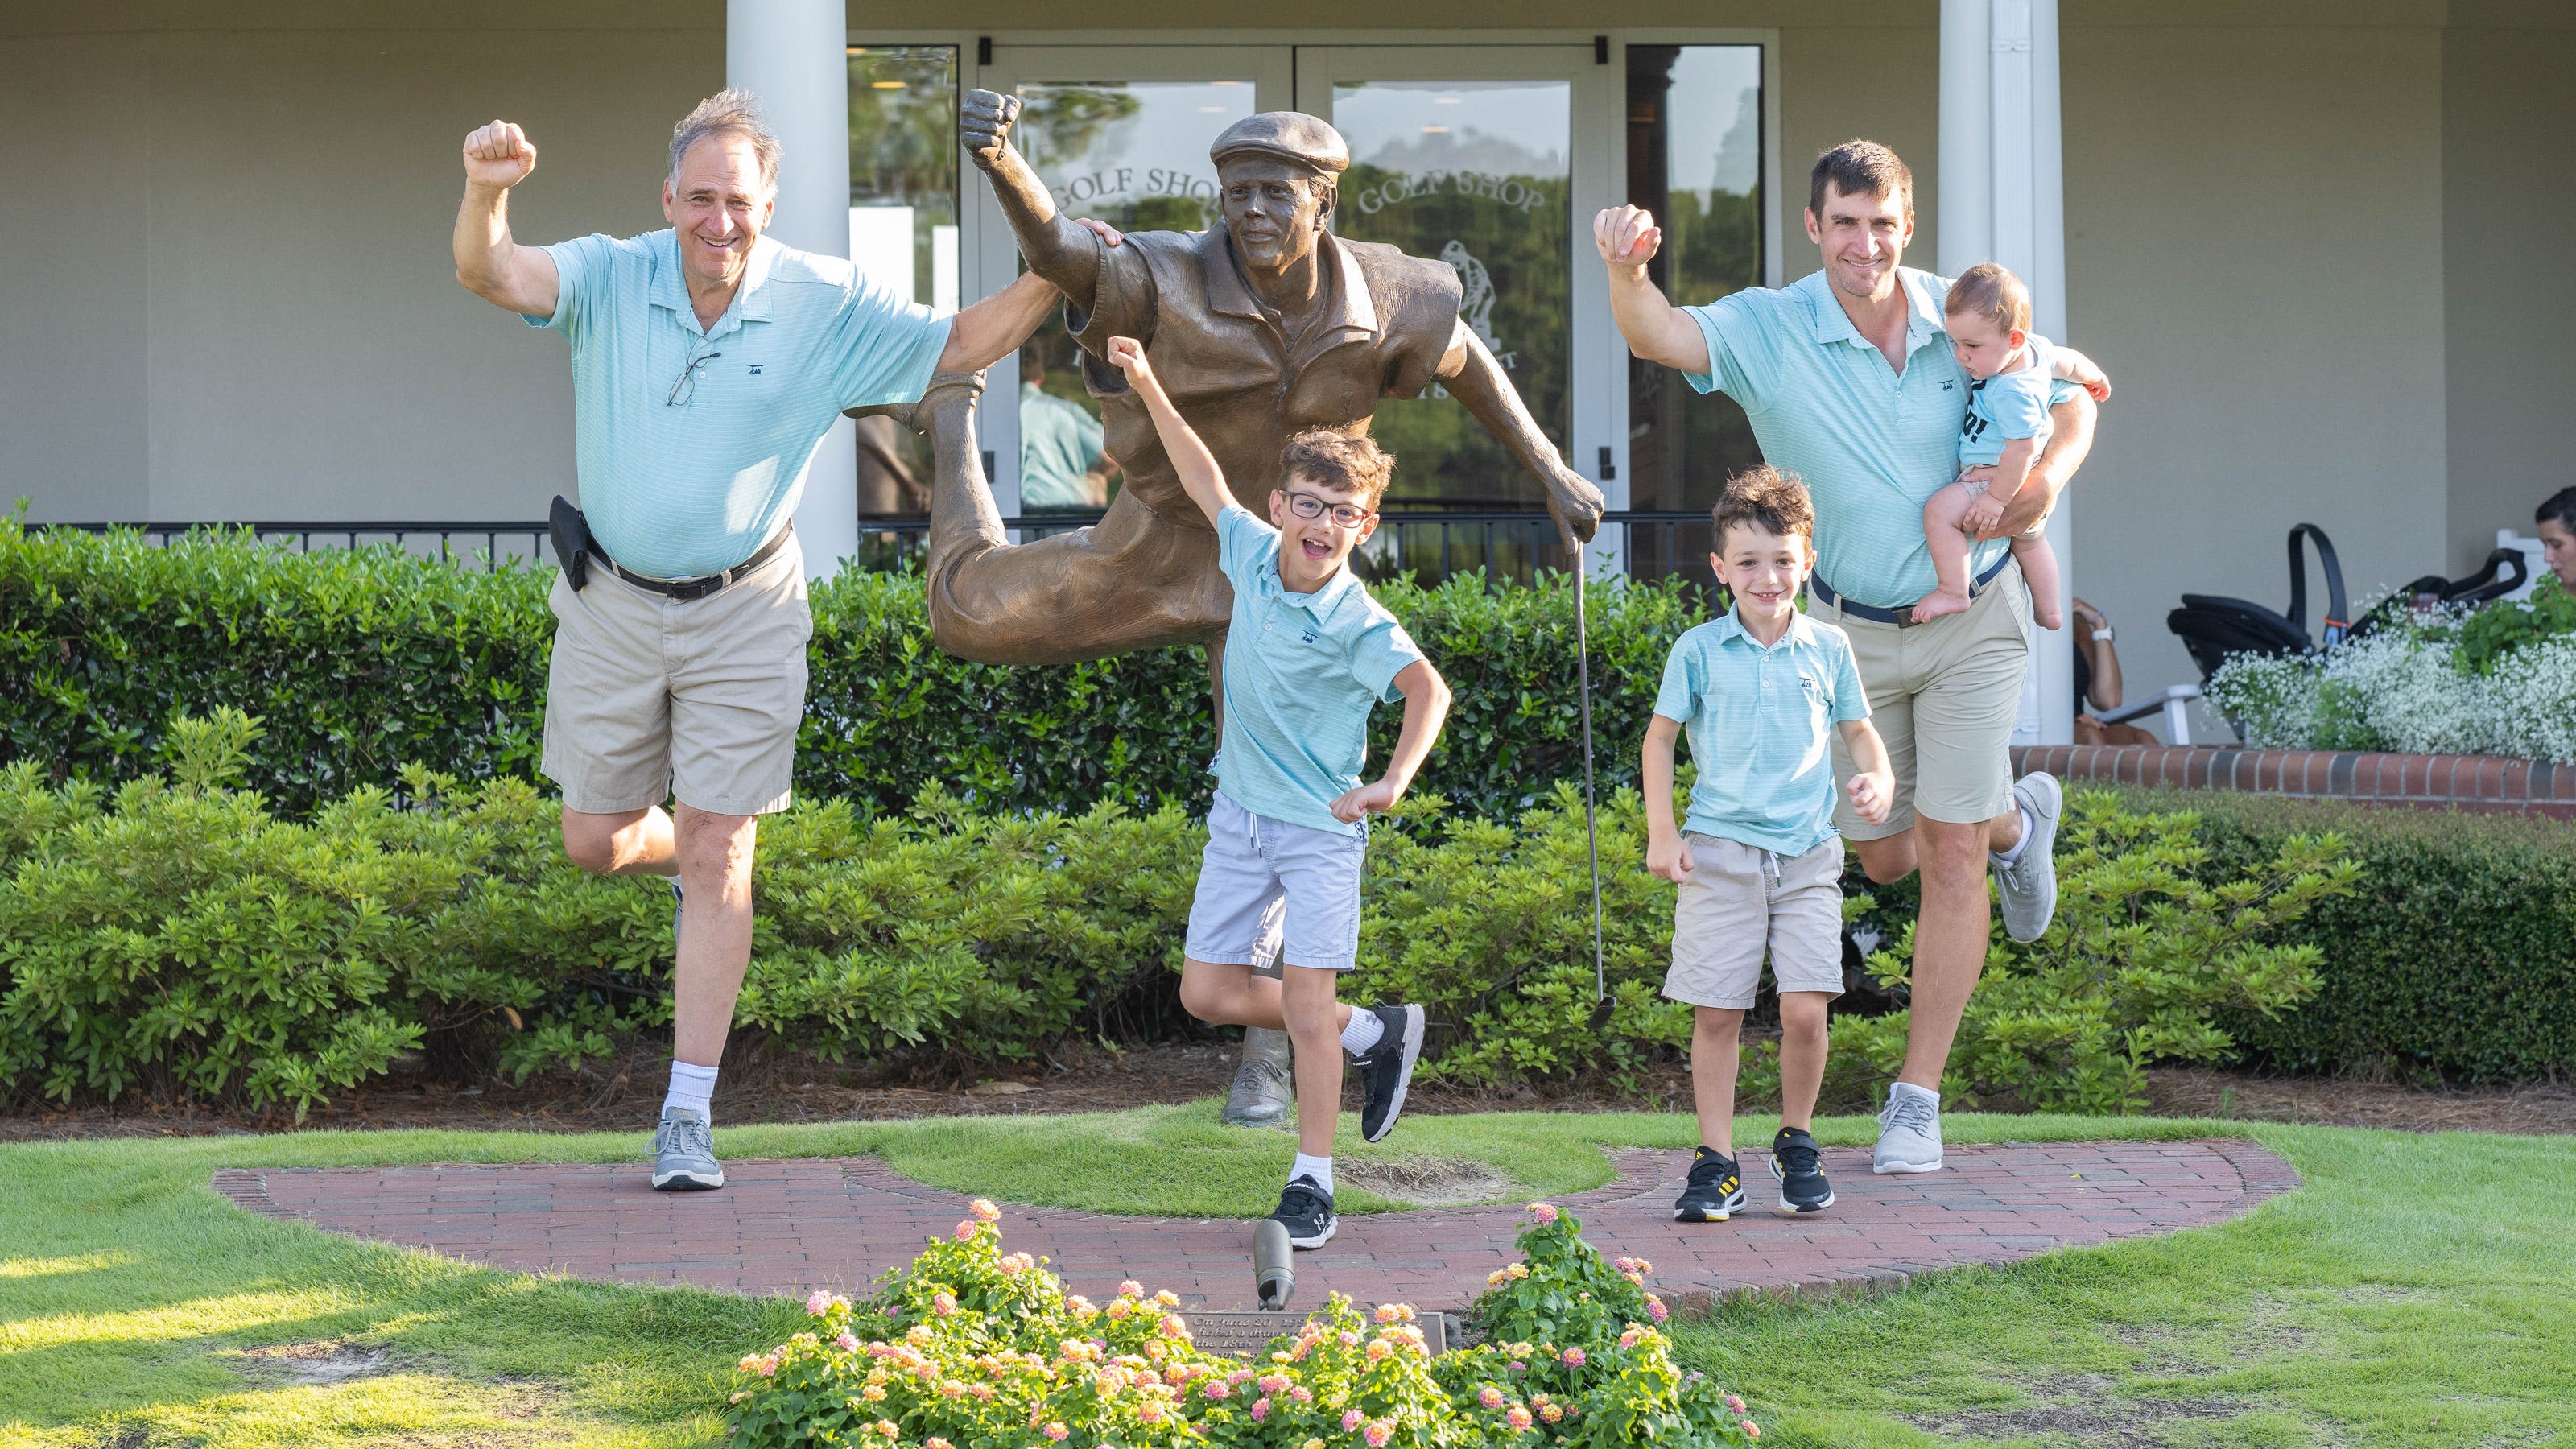 Gallery: Hopewell Junction brothers qualify for U.S. Kids Golf World Championships